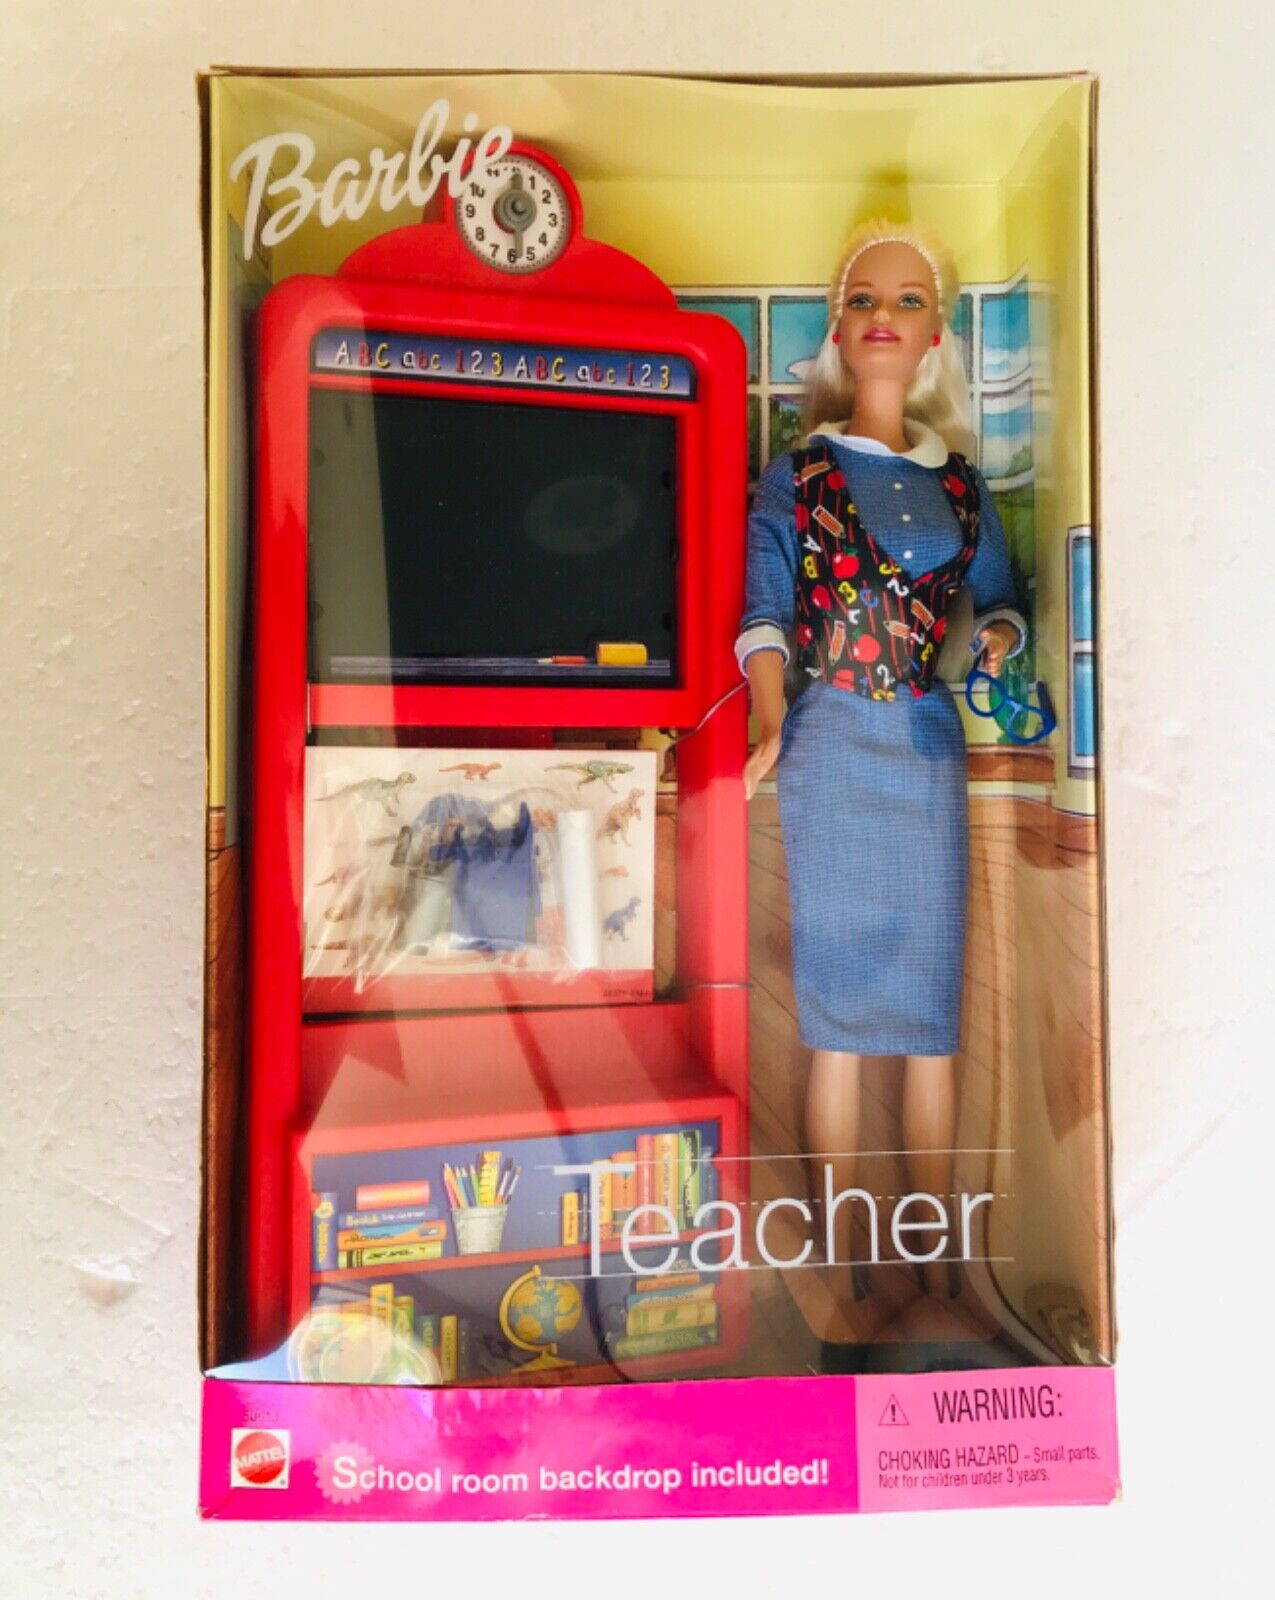 Teacher Barbie Classroom 67114 NRFB 1996 Mattel Ages 3 and Over for sale online